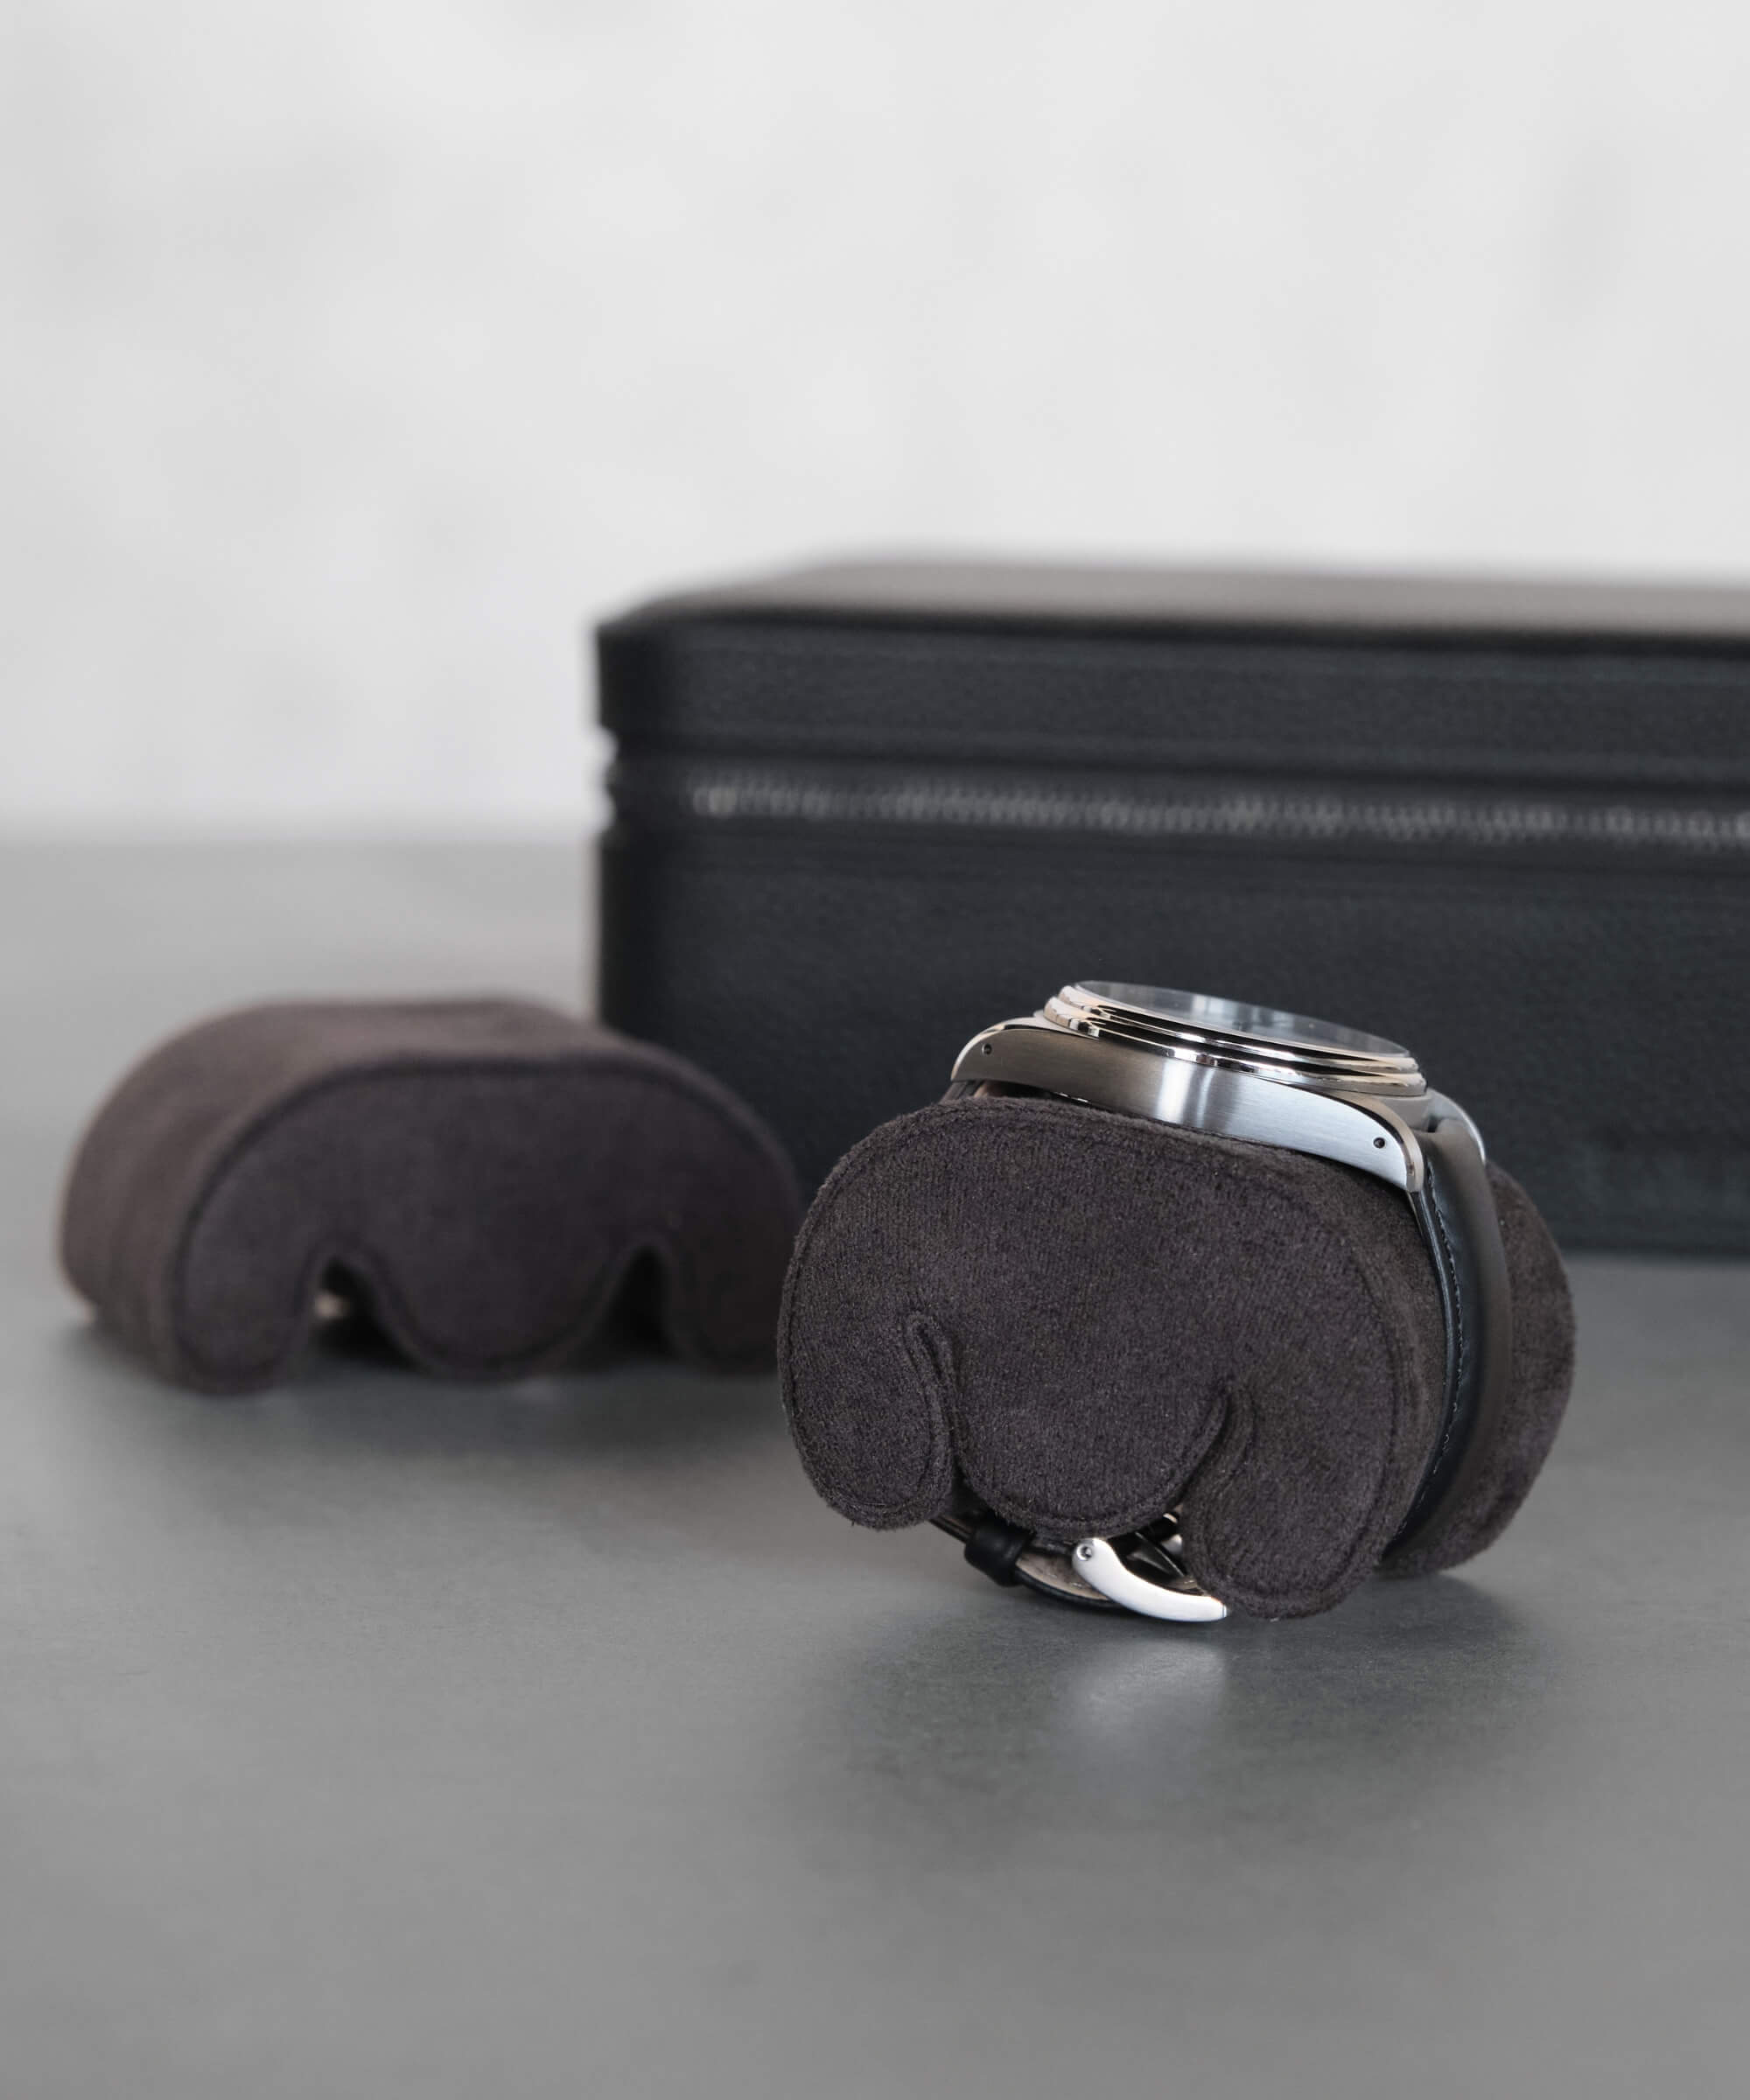 A TAWBURY Fraser 2 Watch Travel Case - Black, for carrying and protecting watches, with a compact design for easy travel.